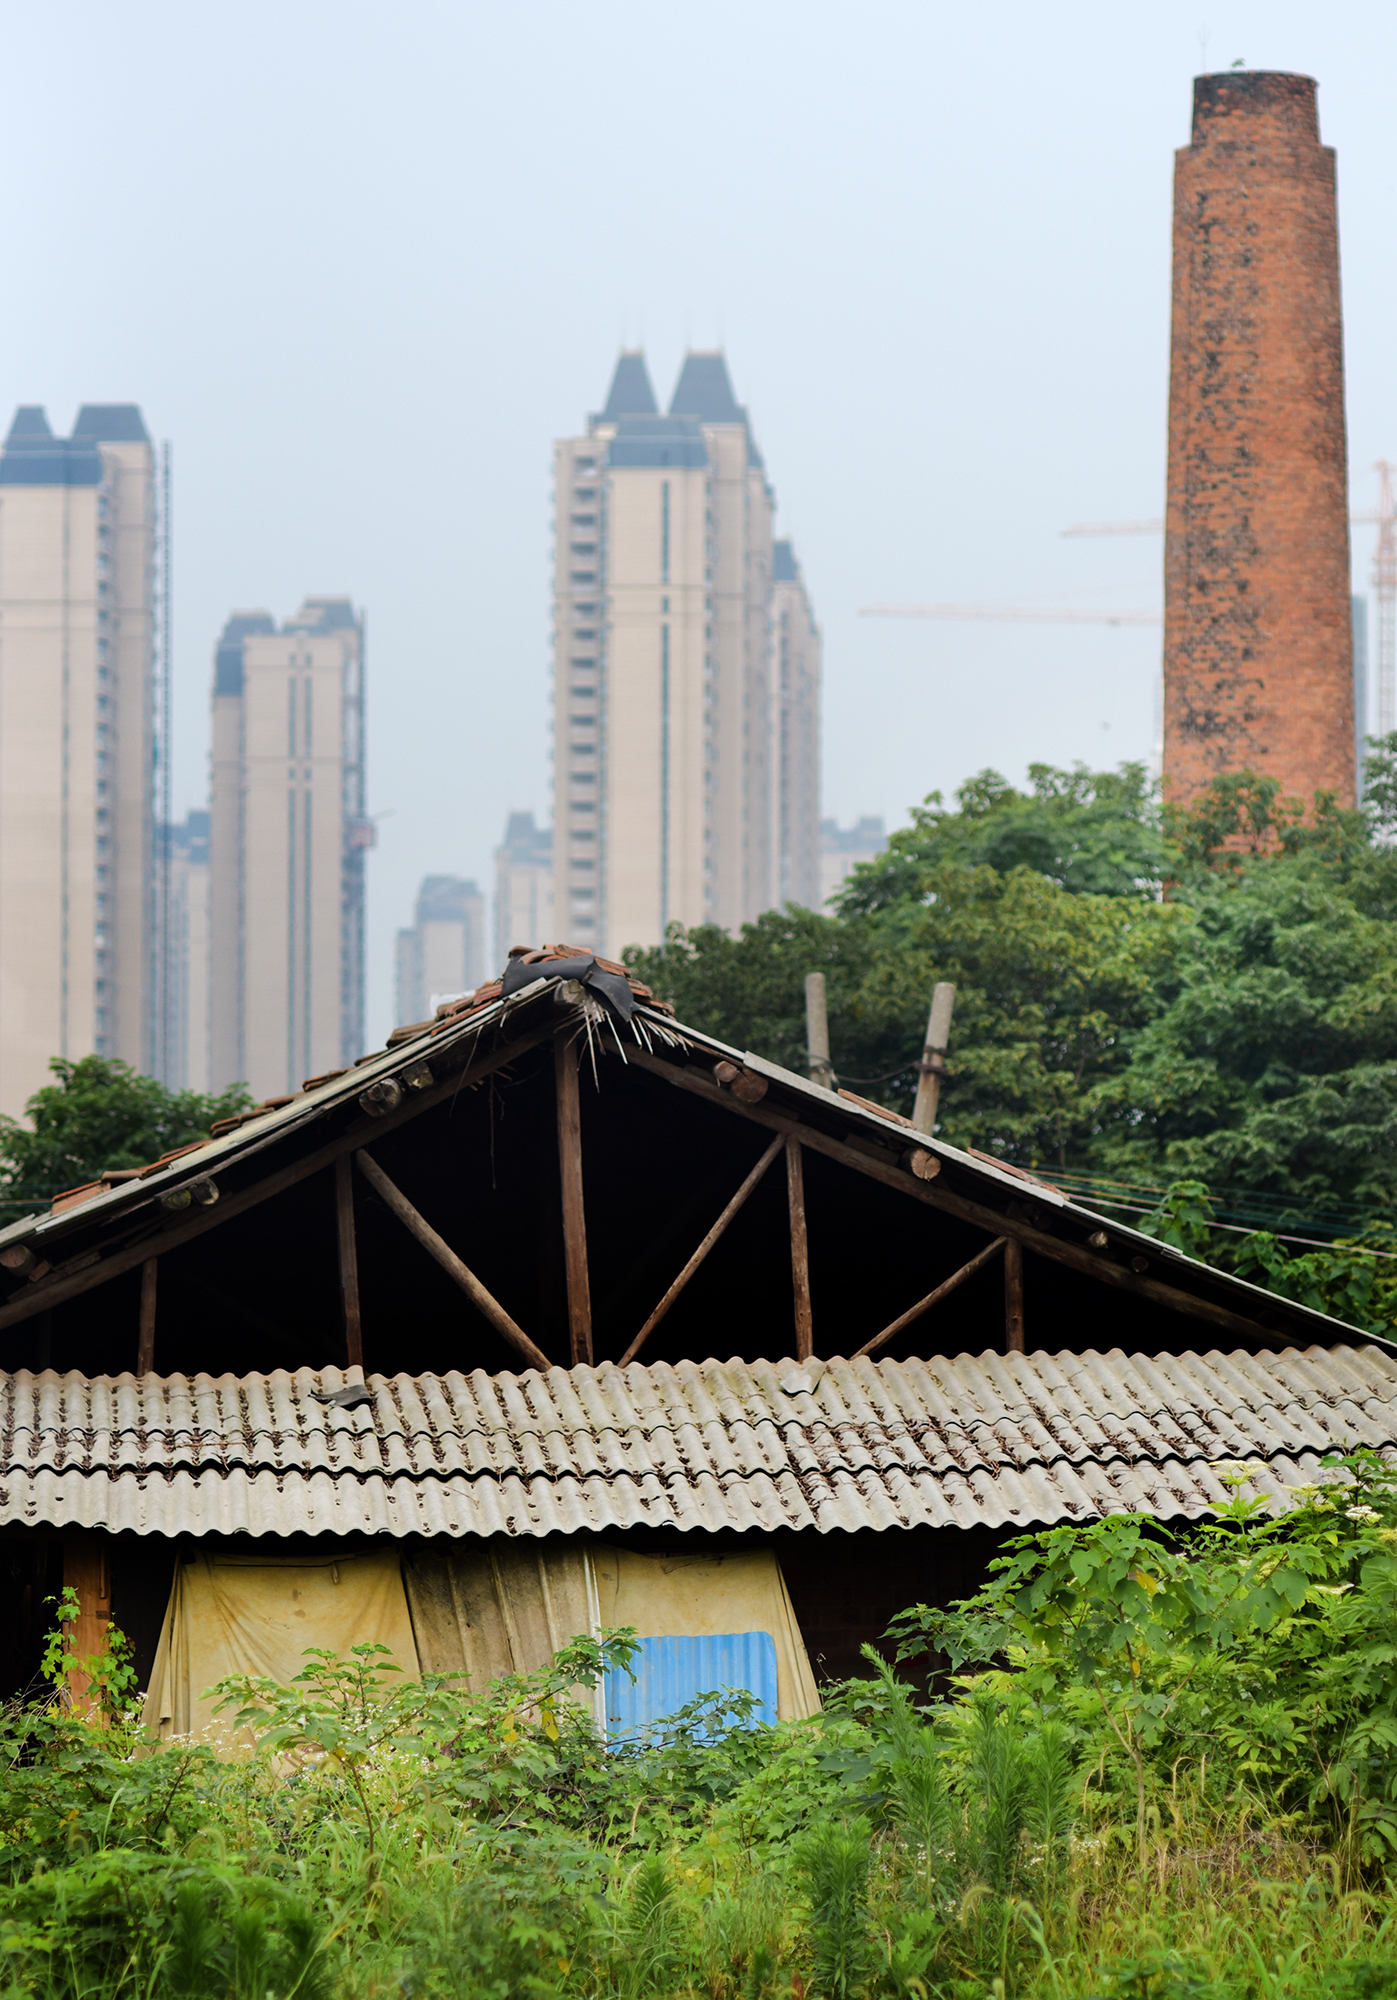  Against the backdrop of JIngzhou city, the workshop and kiln of Xia Yugu, Inheritor of ICH pottery. 